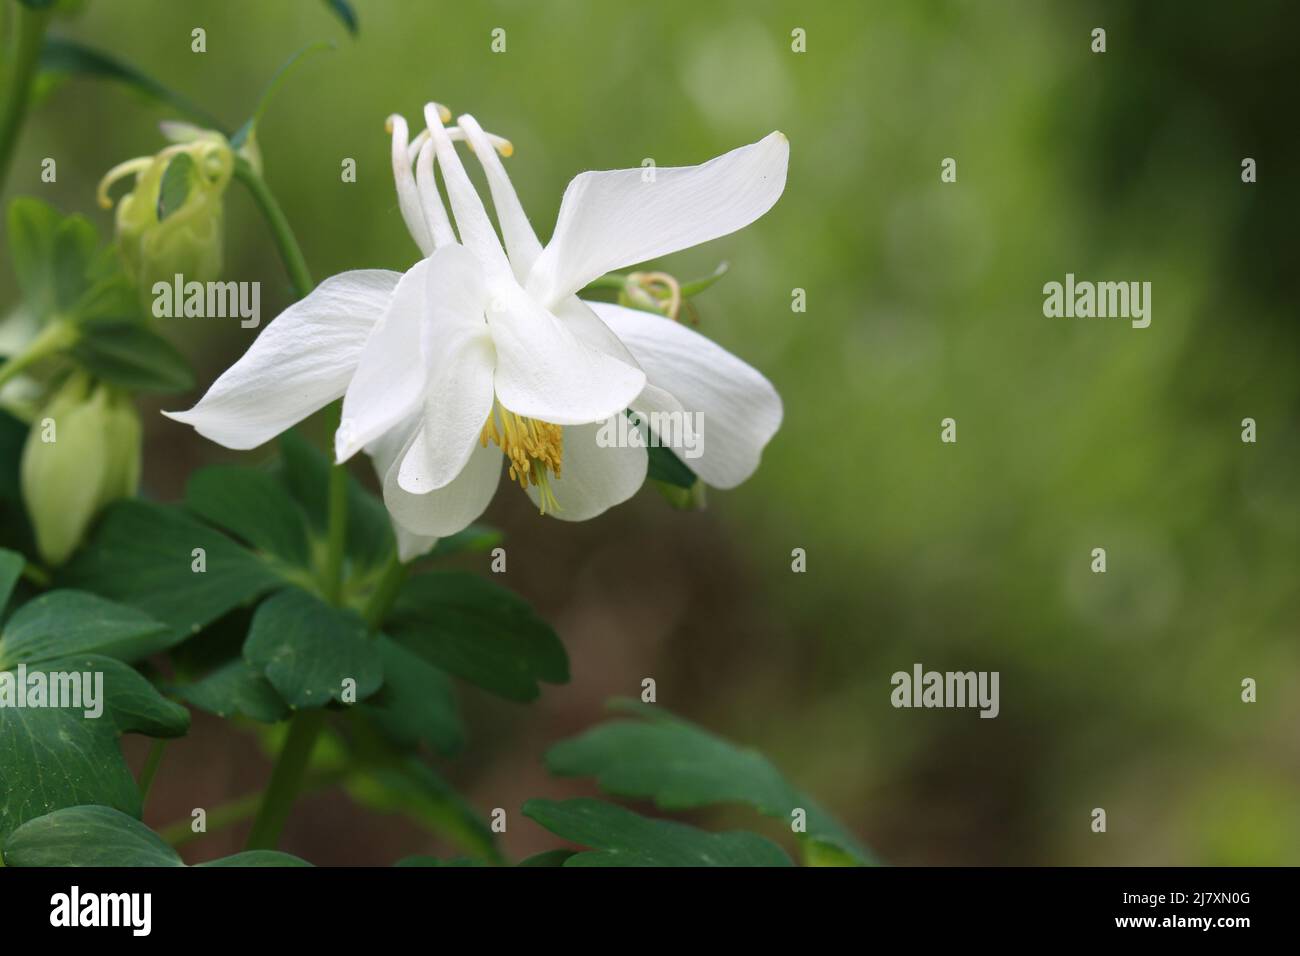 close up of beautiful fresh white aquilegia caerulea against green blurred background, side view, copy space Stock Photo